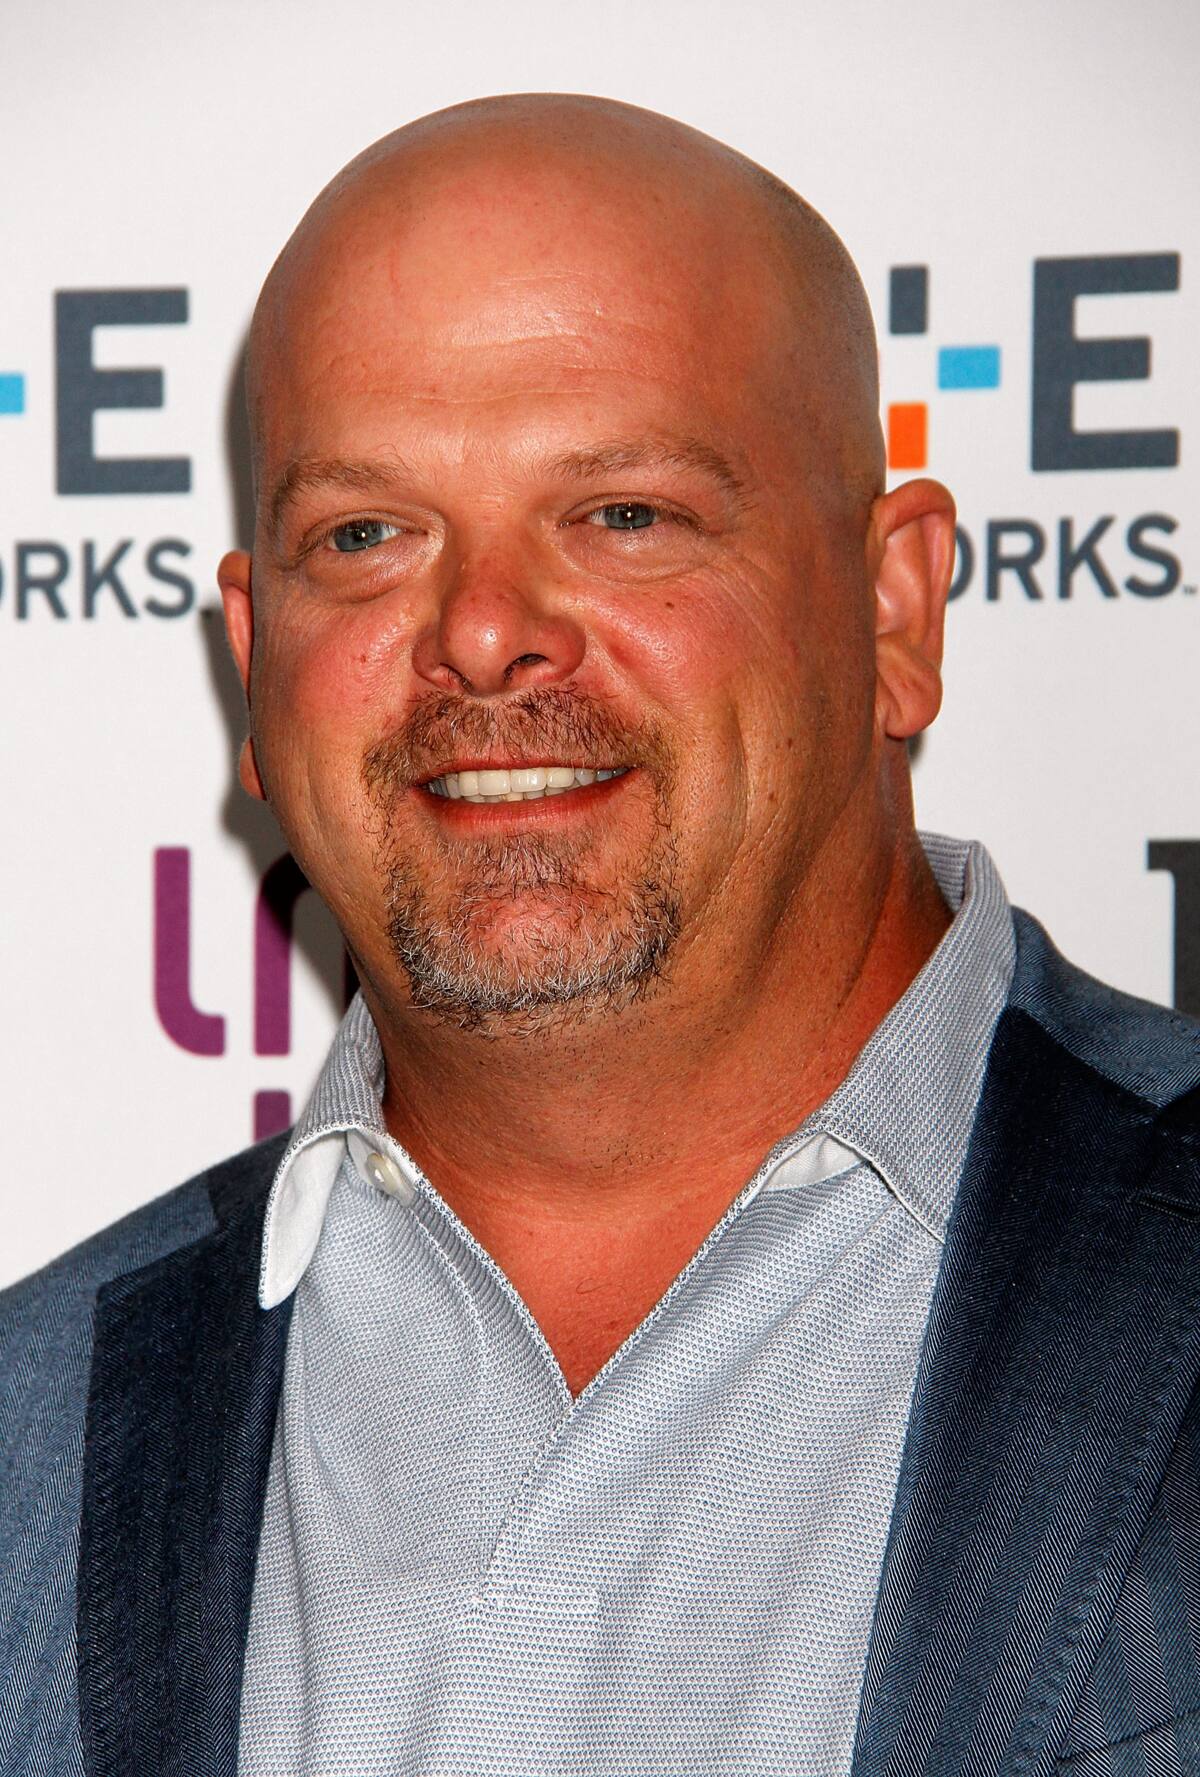 Rick Harrison’s net worth, age, children, wife, collection, TV shows